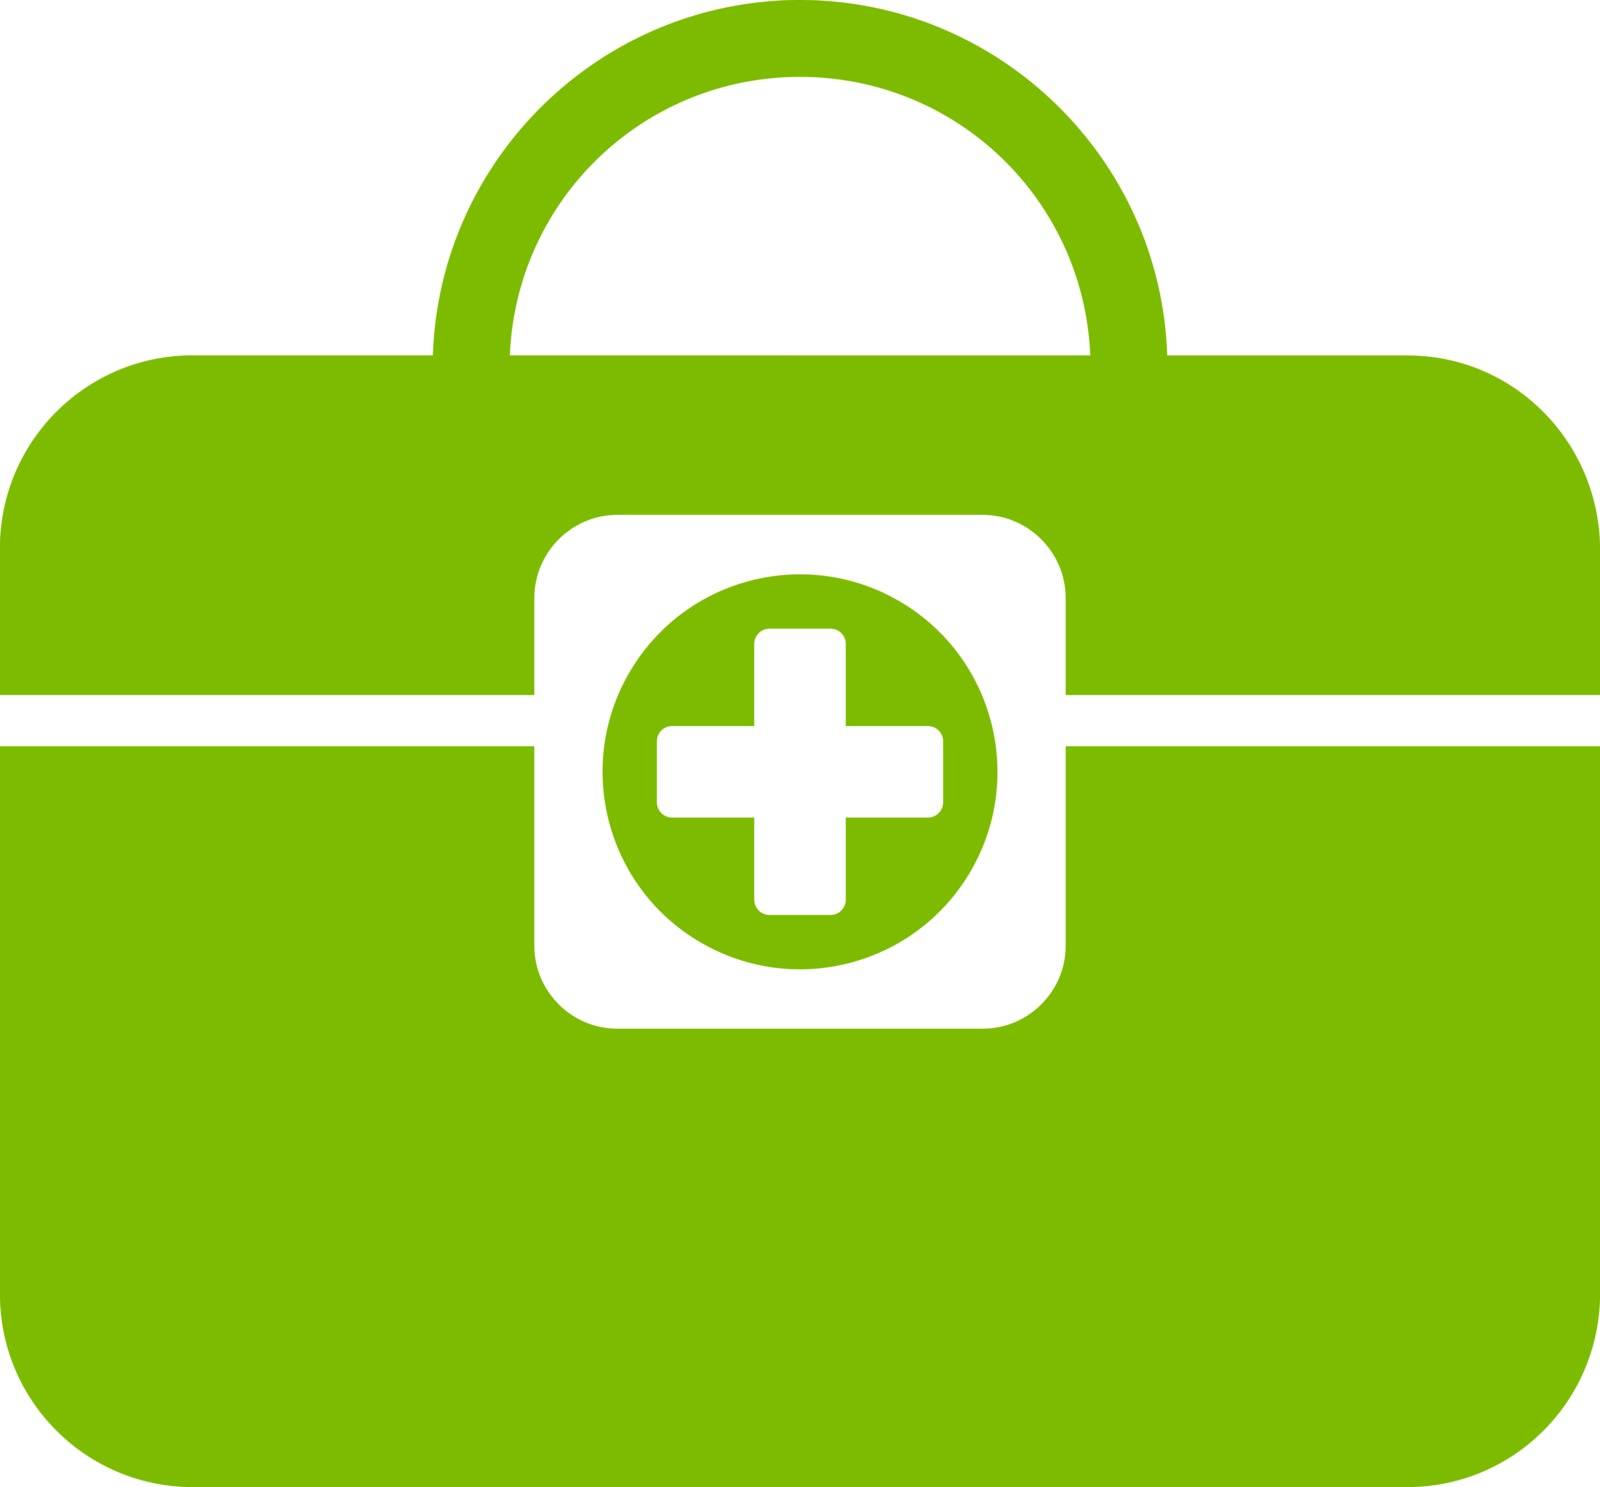 Medic Case vector icon. Style is flat symbol, eco green color, rounded angles, white background.